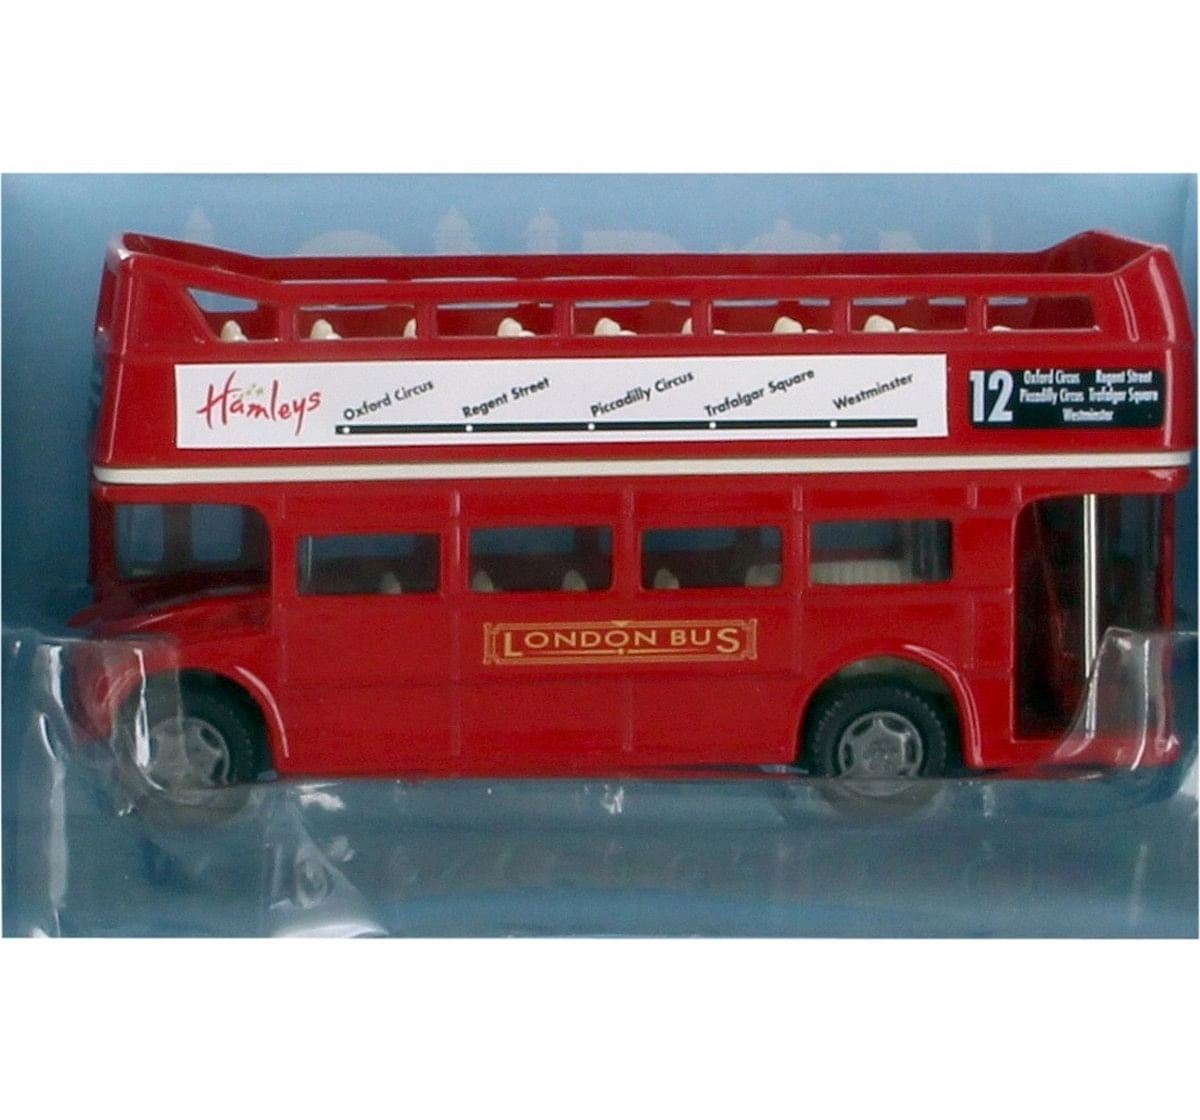  Hamleys Open Top London Bus (Red) Vehicles for Kids age 3Y+ (Red)